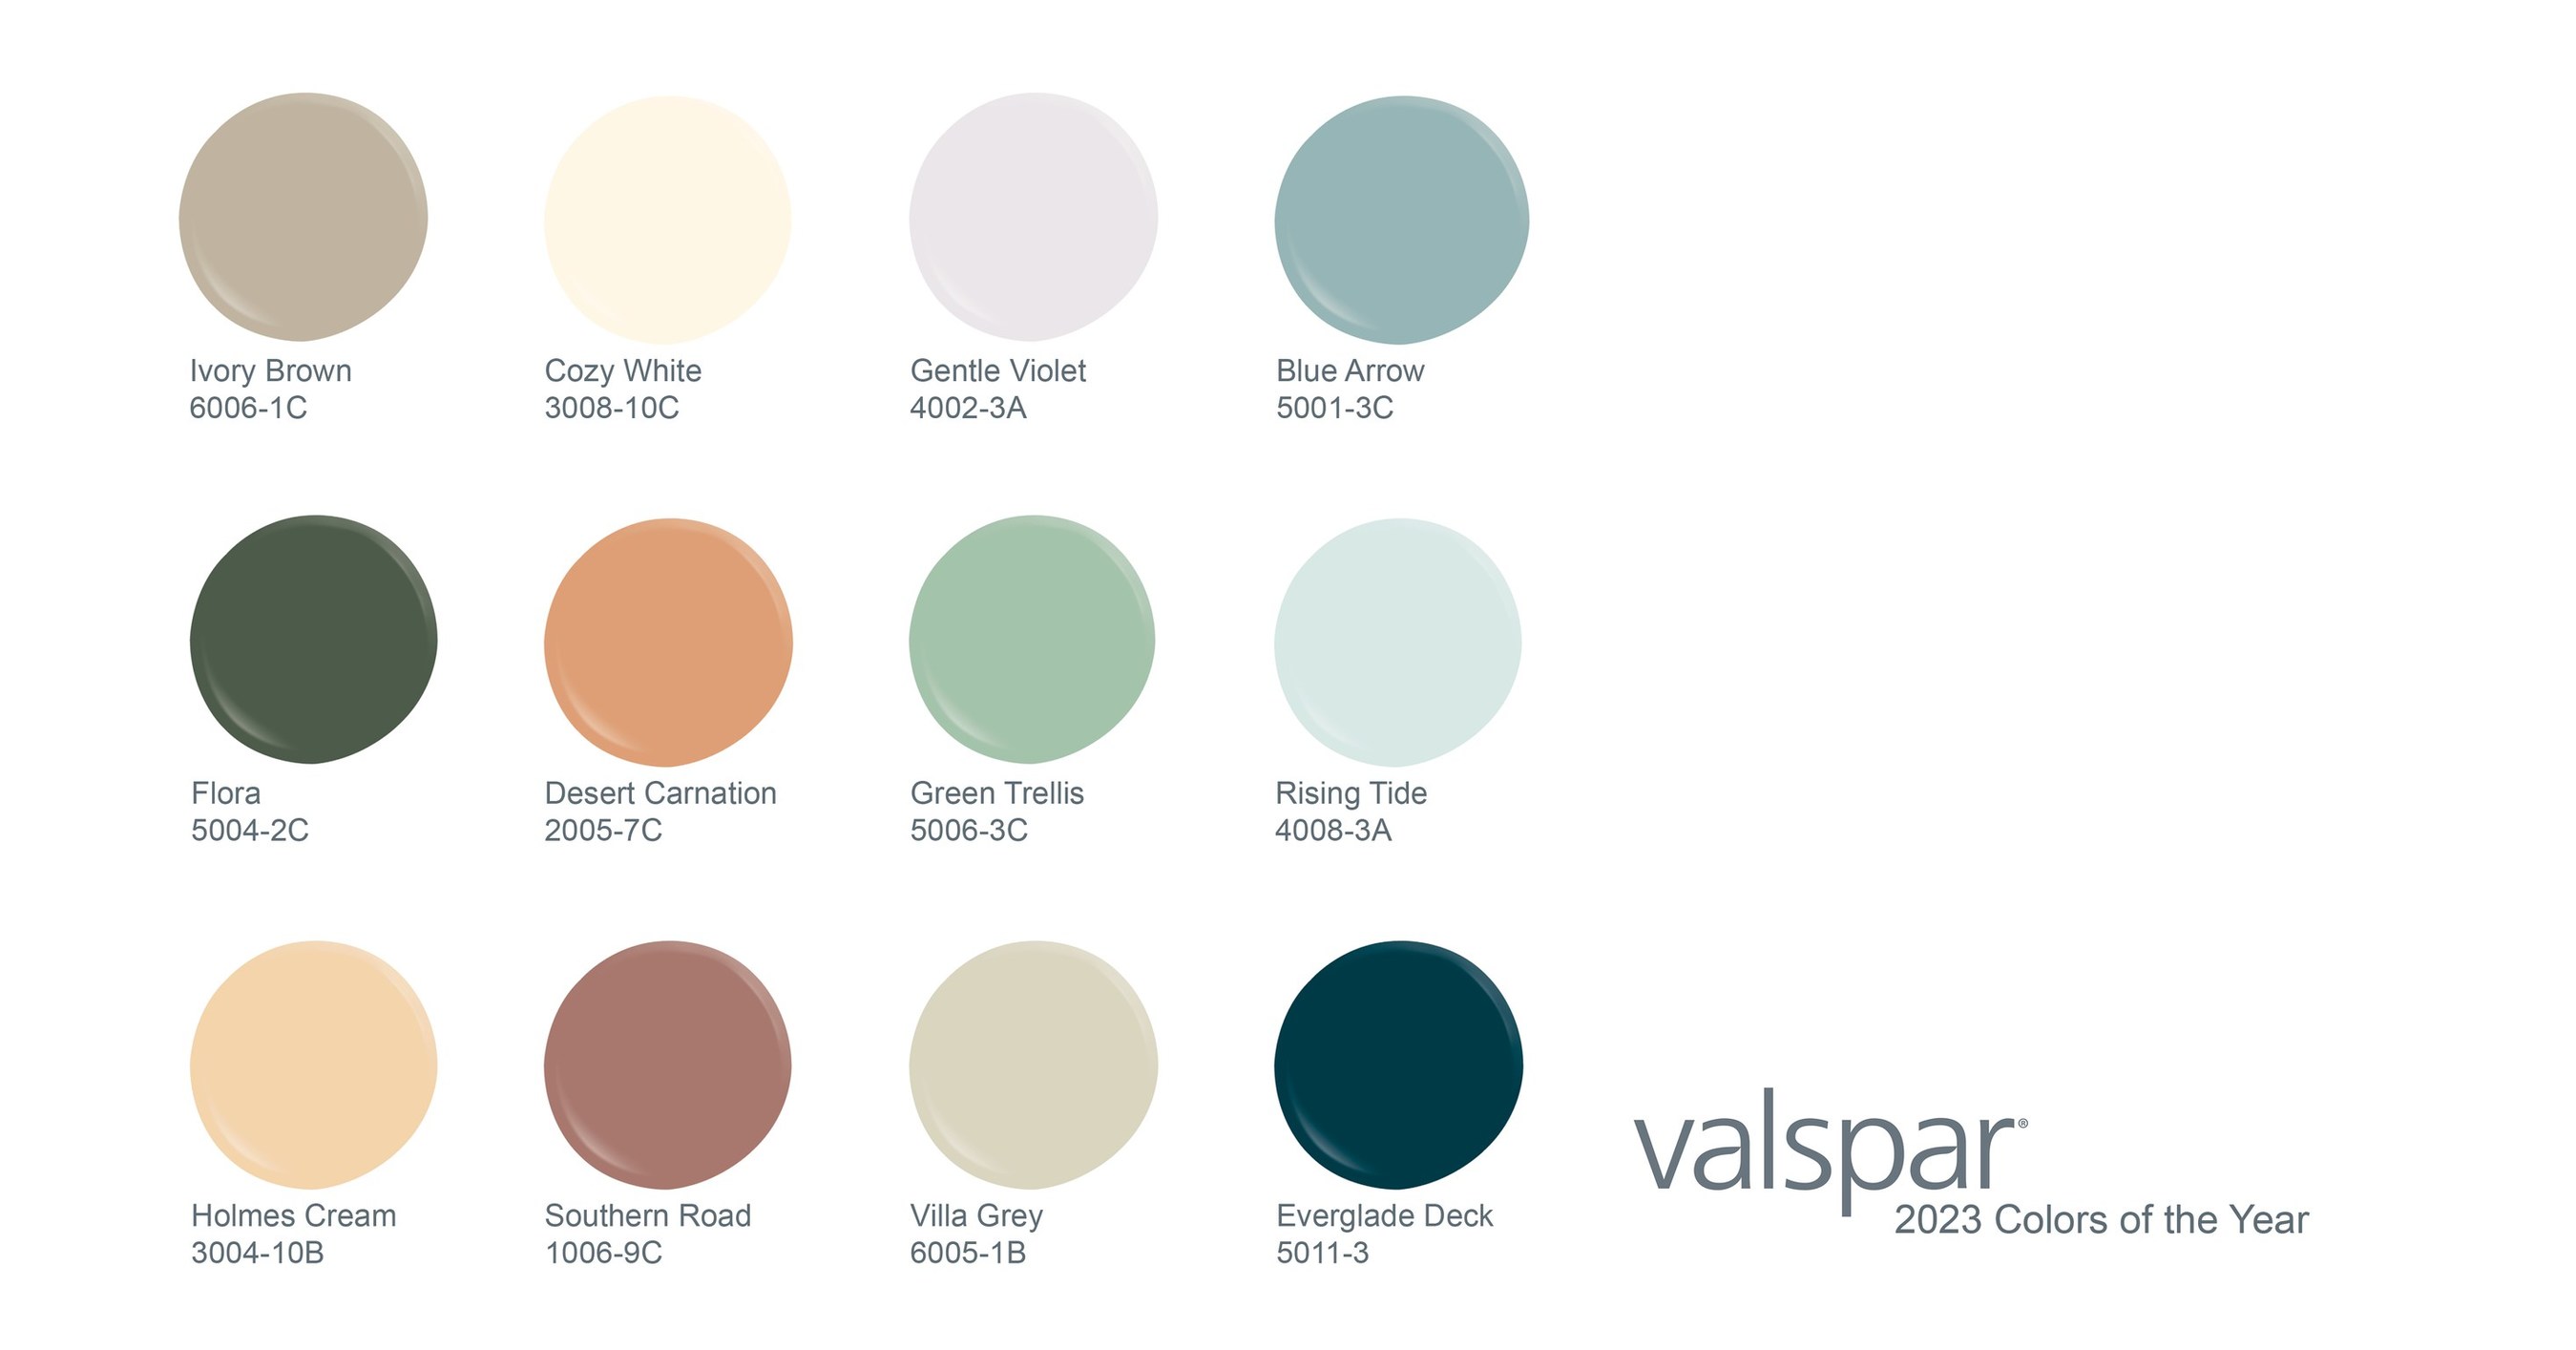 Valspar Reveals Fresh Lineup of New Shades in 2023 Colors of the Year